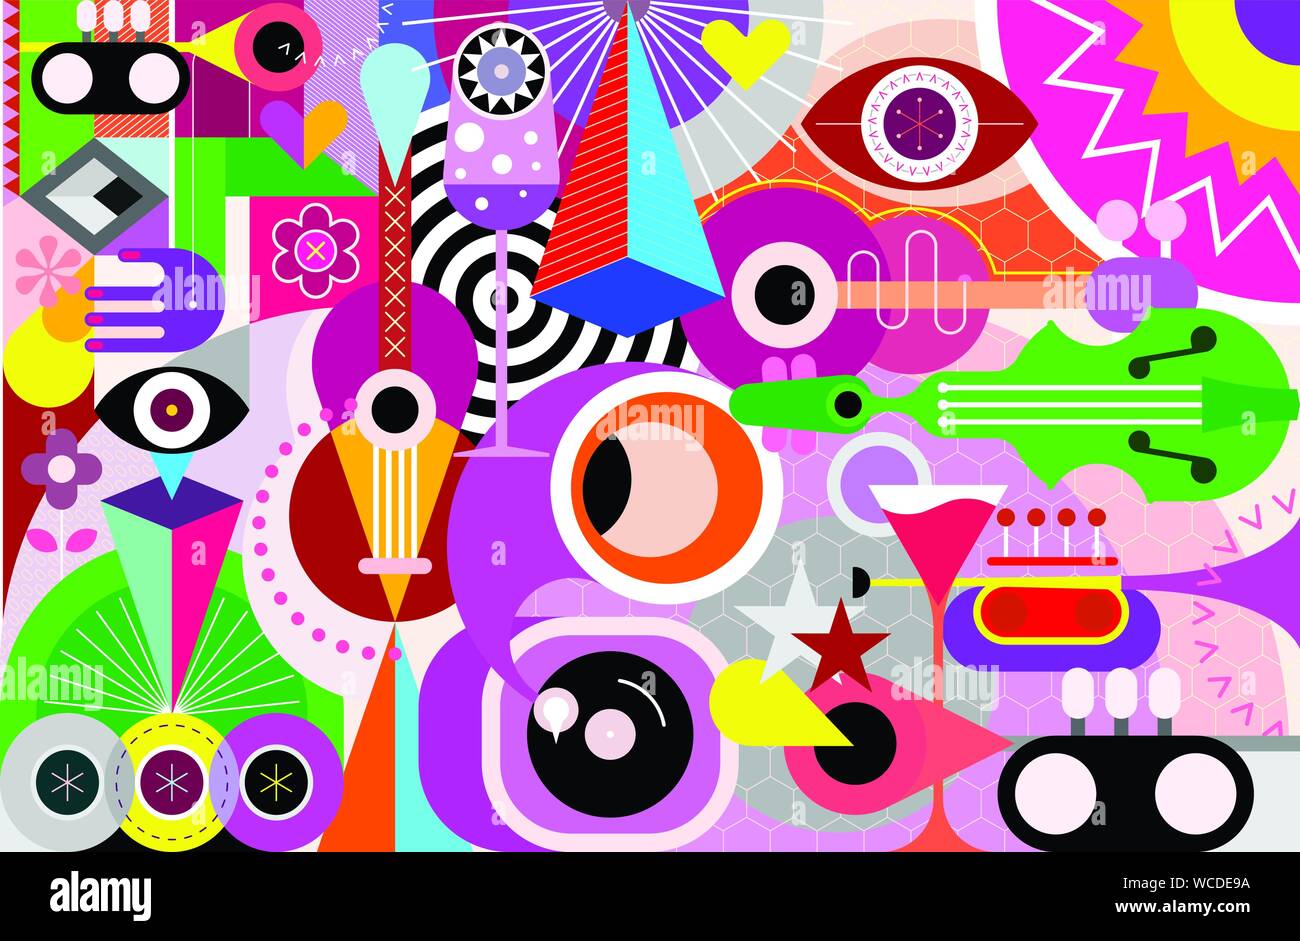 Music festival abstract art vector background. Design with musical instruments, geometric shapes and cocktail glasses. Stock Vector